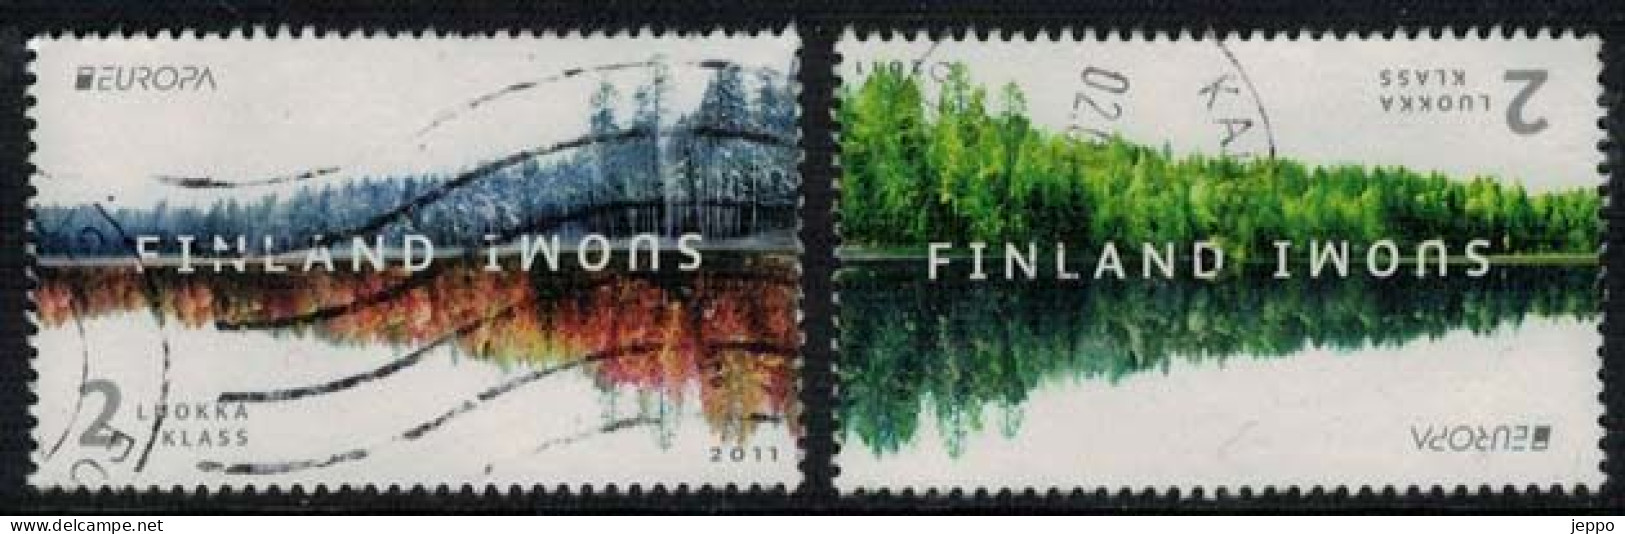 2011 Finland, Europa Cept Forrest Used Set. - Used Stamps